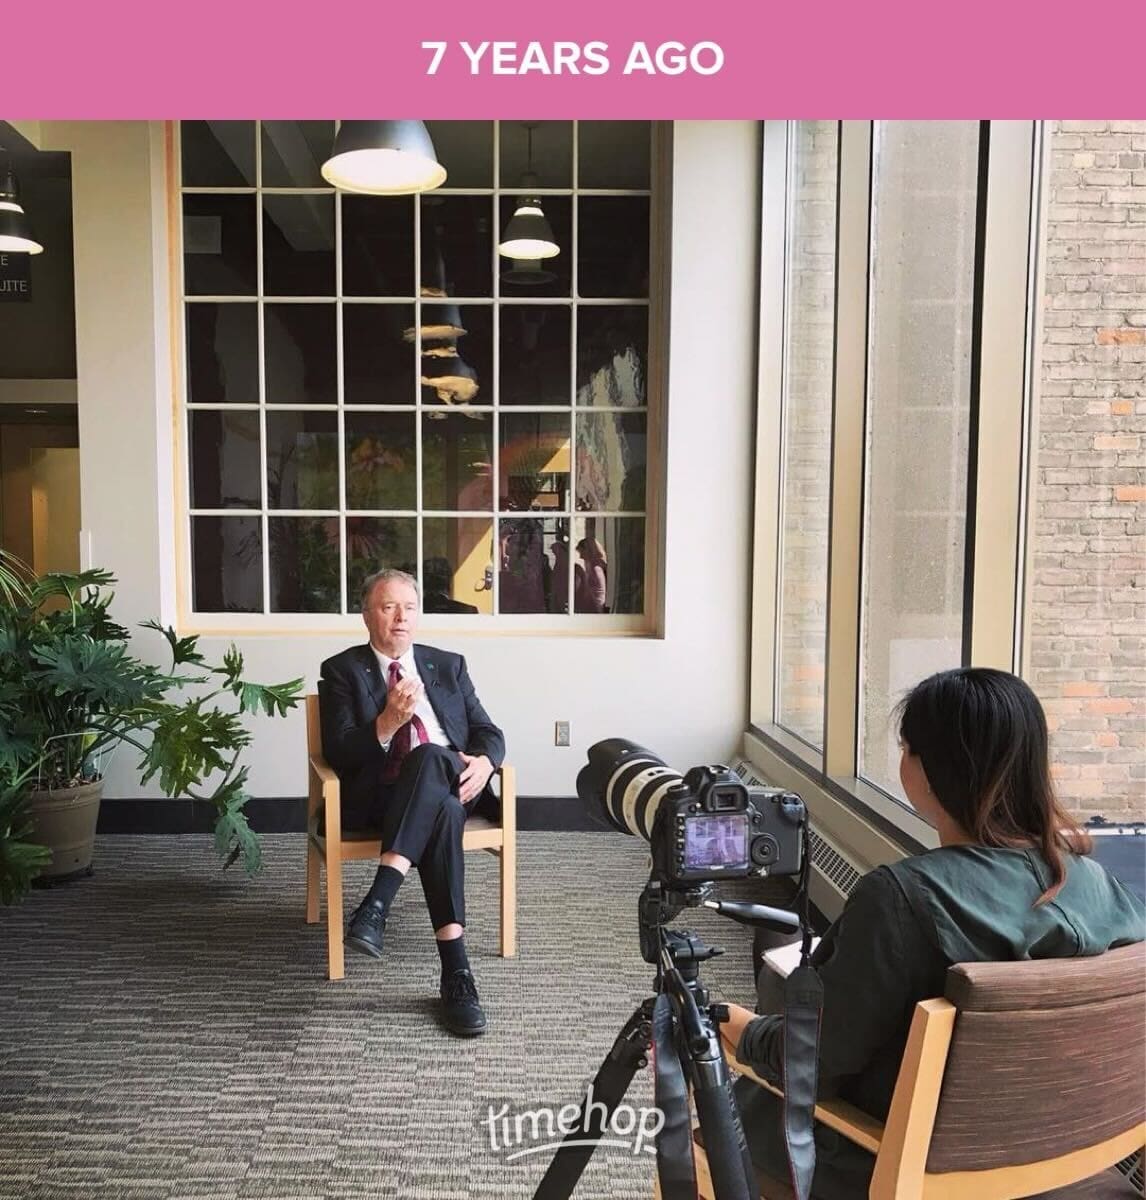 A Timehop photo showing a candid moment from 7 years ago. A man in a suit sits on a wooden chair in an indoor setting, gesturing mid-conversation. In front of him, a camera on a tripod is focused on him, operated by a person whose back is to the camera. The room is well-lit with natural light streaming in through a large window with white frames. A couple of potted plants add a touch of greenery to the scene.